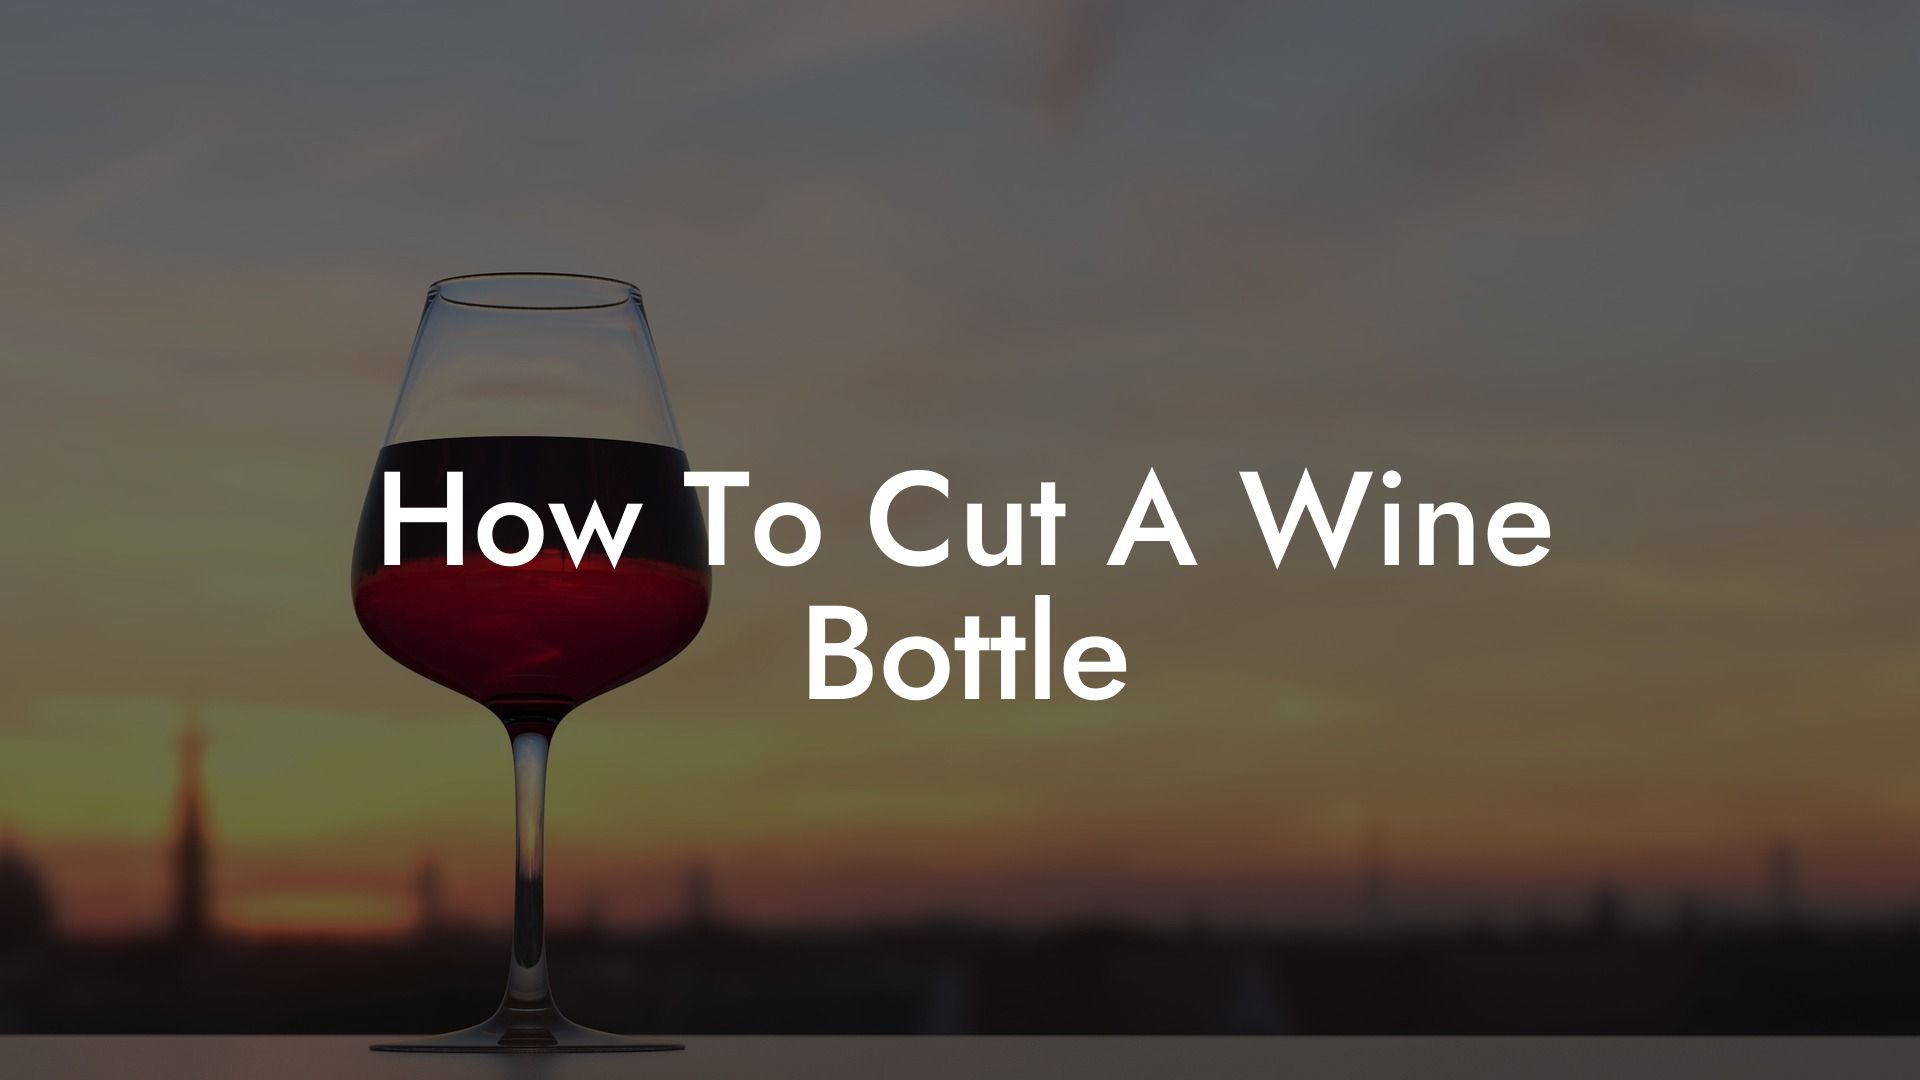 How To Cut A Wine Bottle